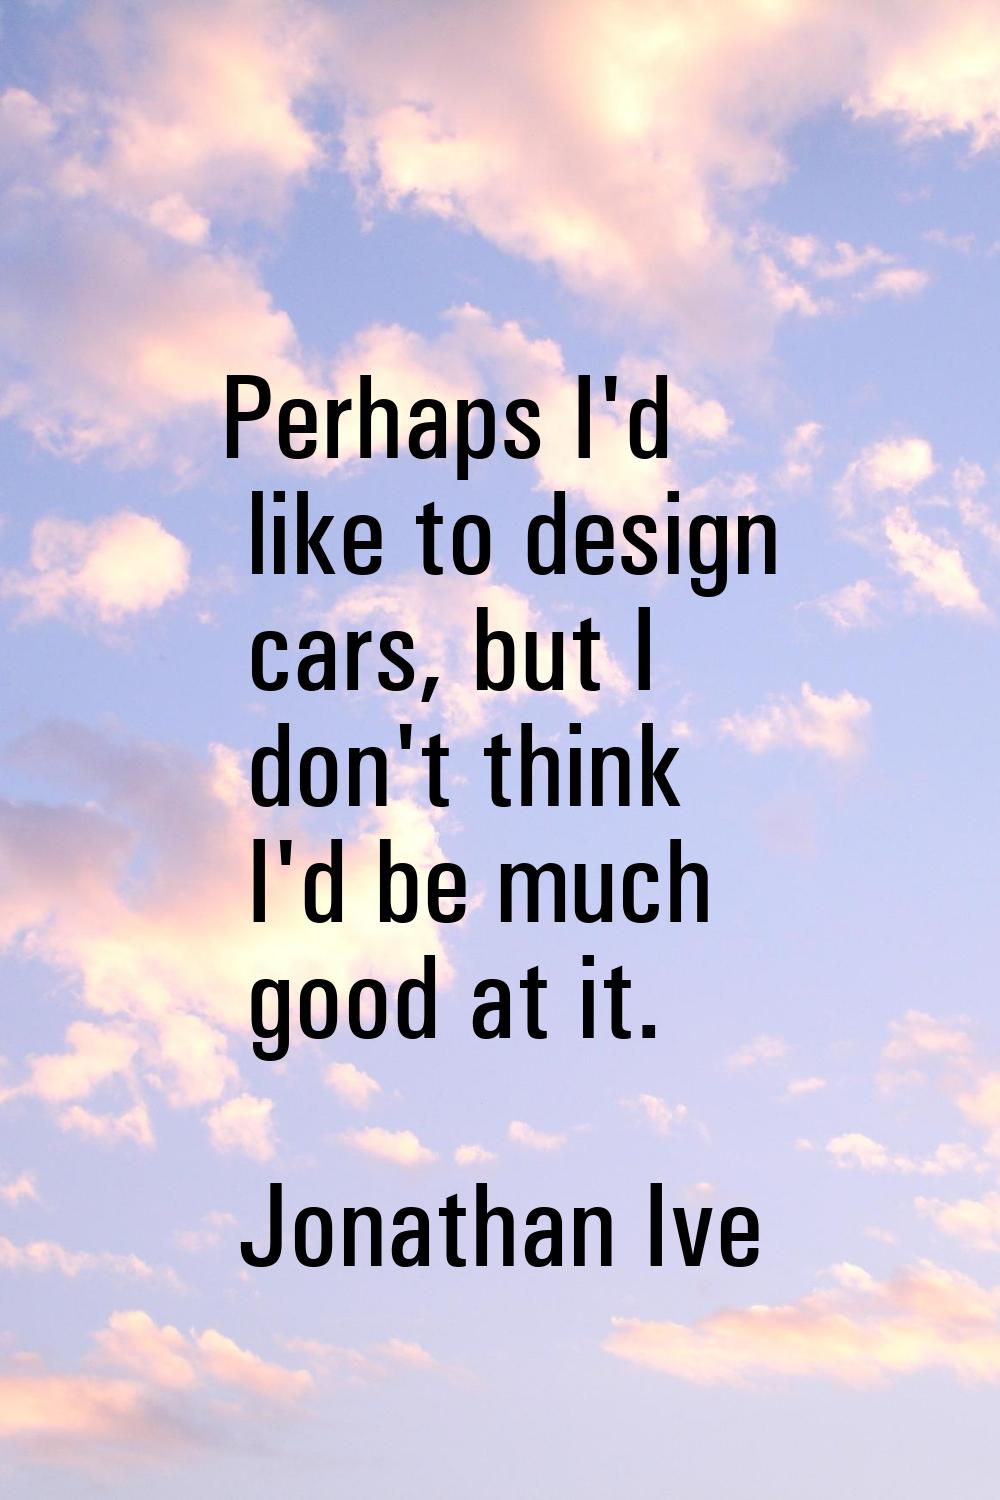 Perhaps I'd like to design cars, but I don't think I'd be much good at it.